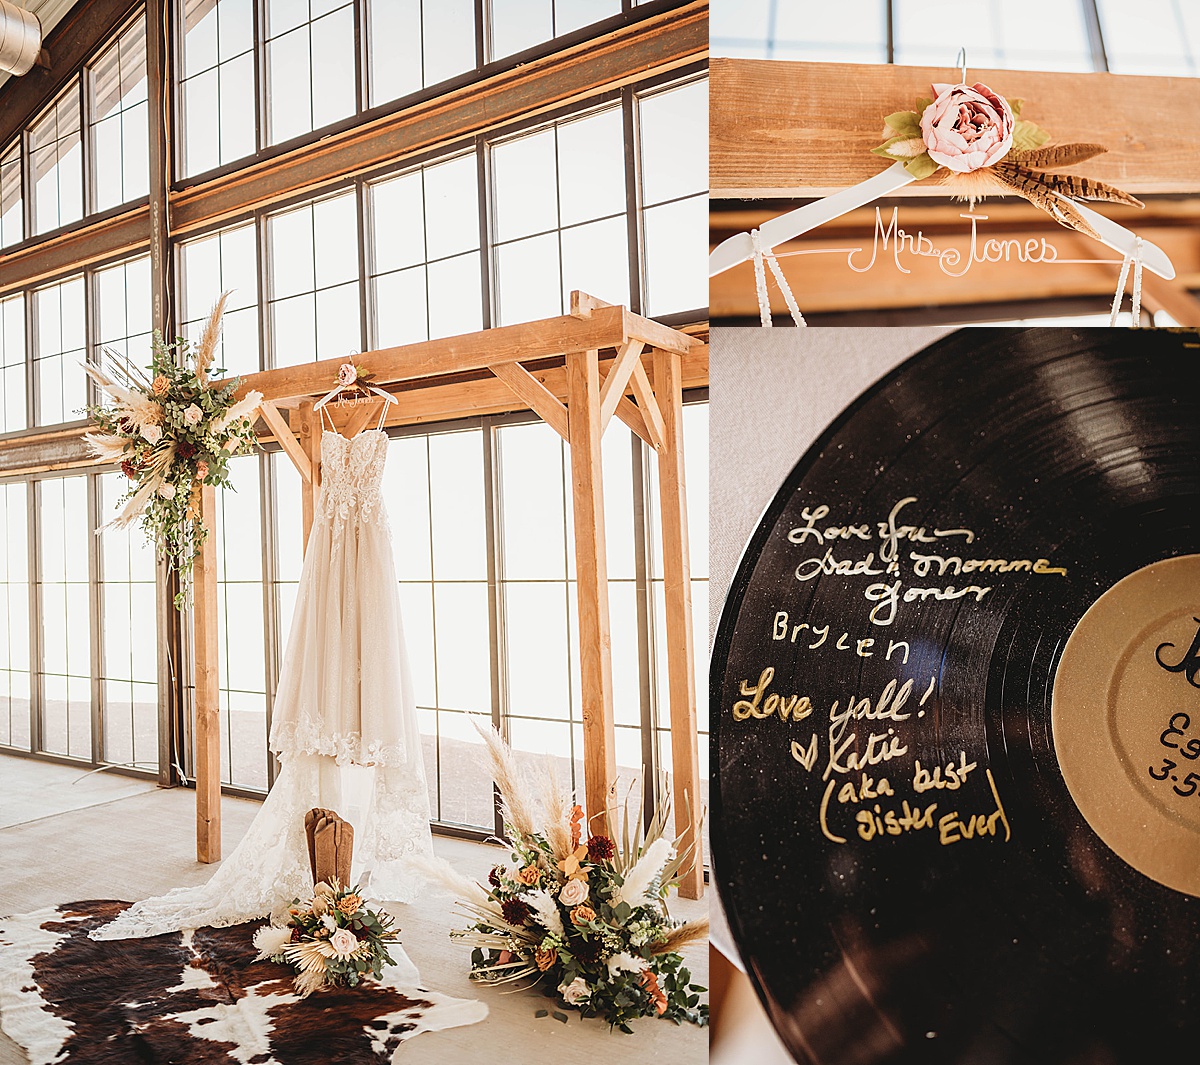 Details of dress and guest book from boho prairie wedding shoot